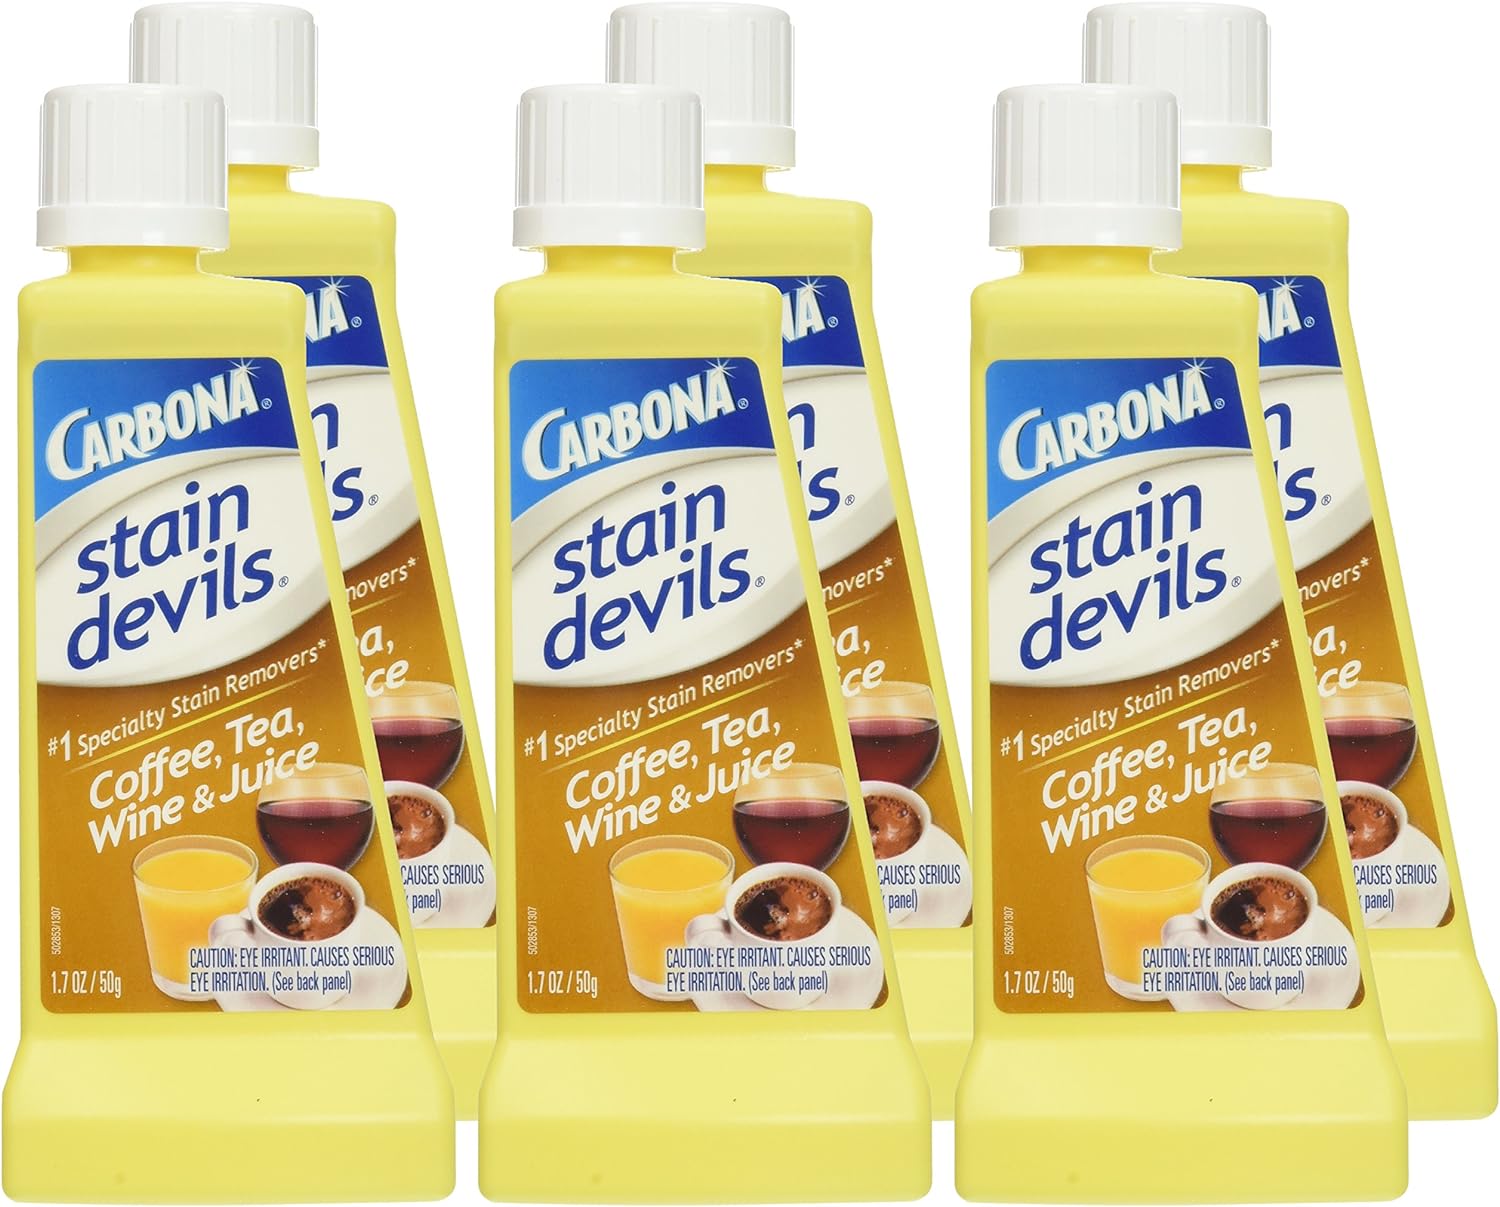 CARBONA STAIN DEVILS #8 FOR FRUIT & RED WINE 6 PACK [Misc.] : Health & Household